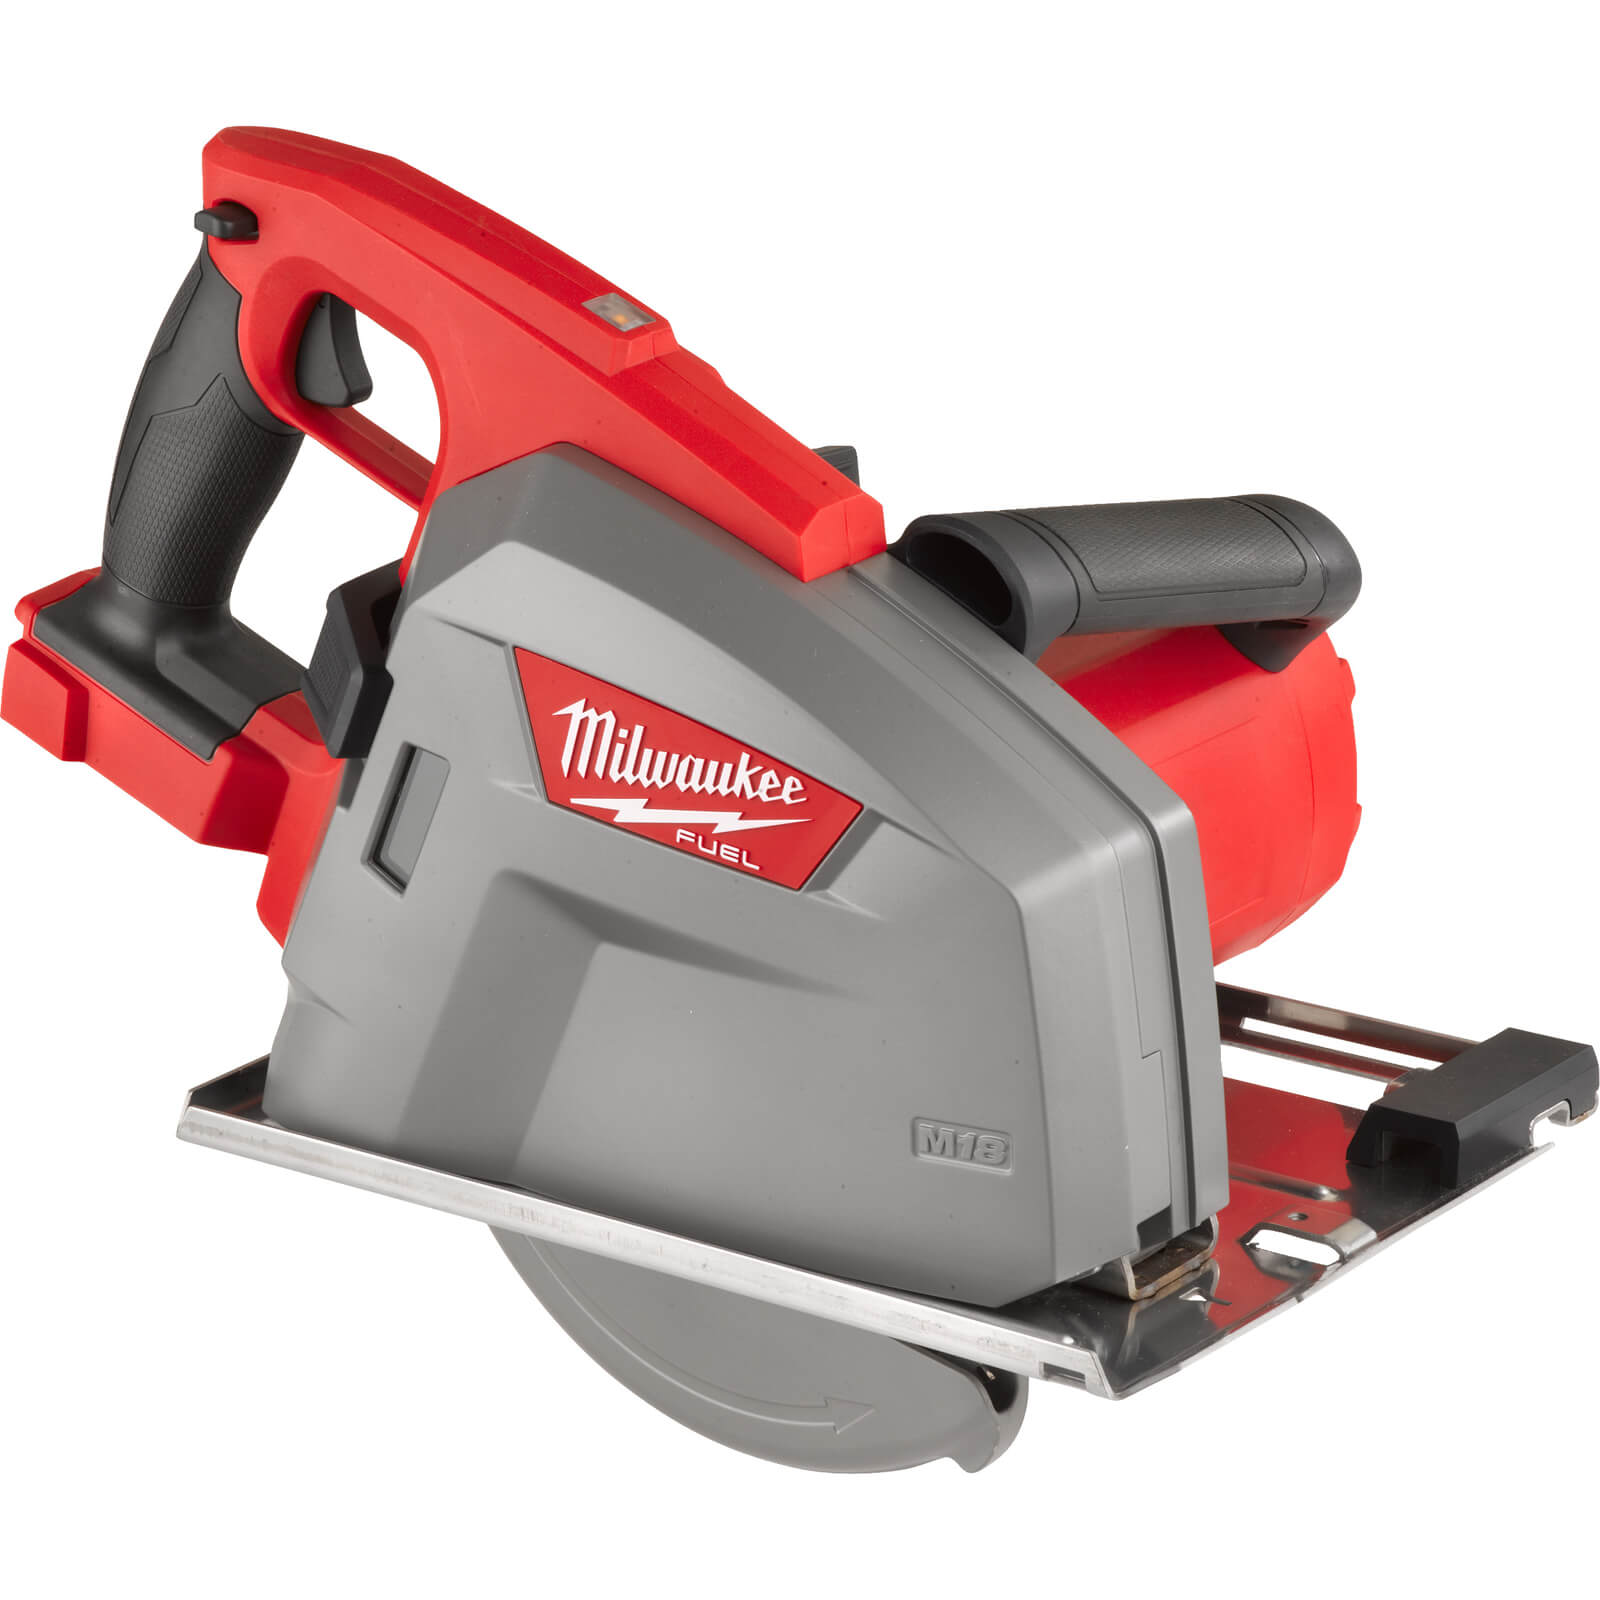 Image of Milwaukee M18 FMCS66 Fuel 18v Cordless Brushless Metal Circular Saw 203mm No Batteries No Charger Case